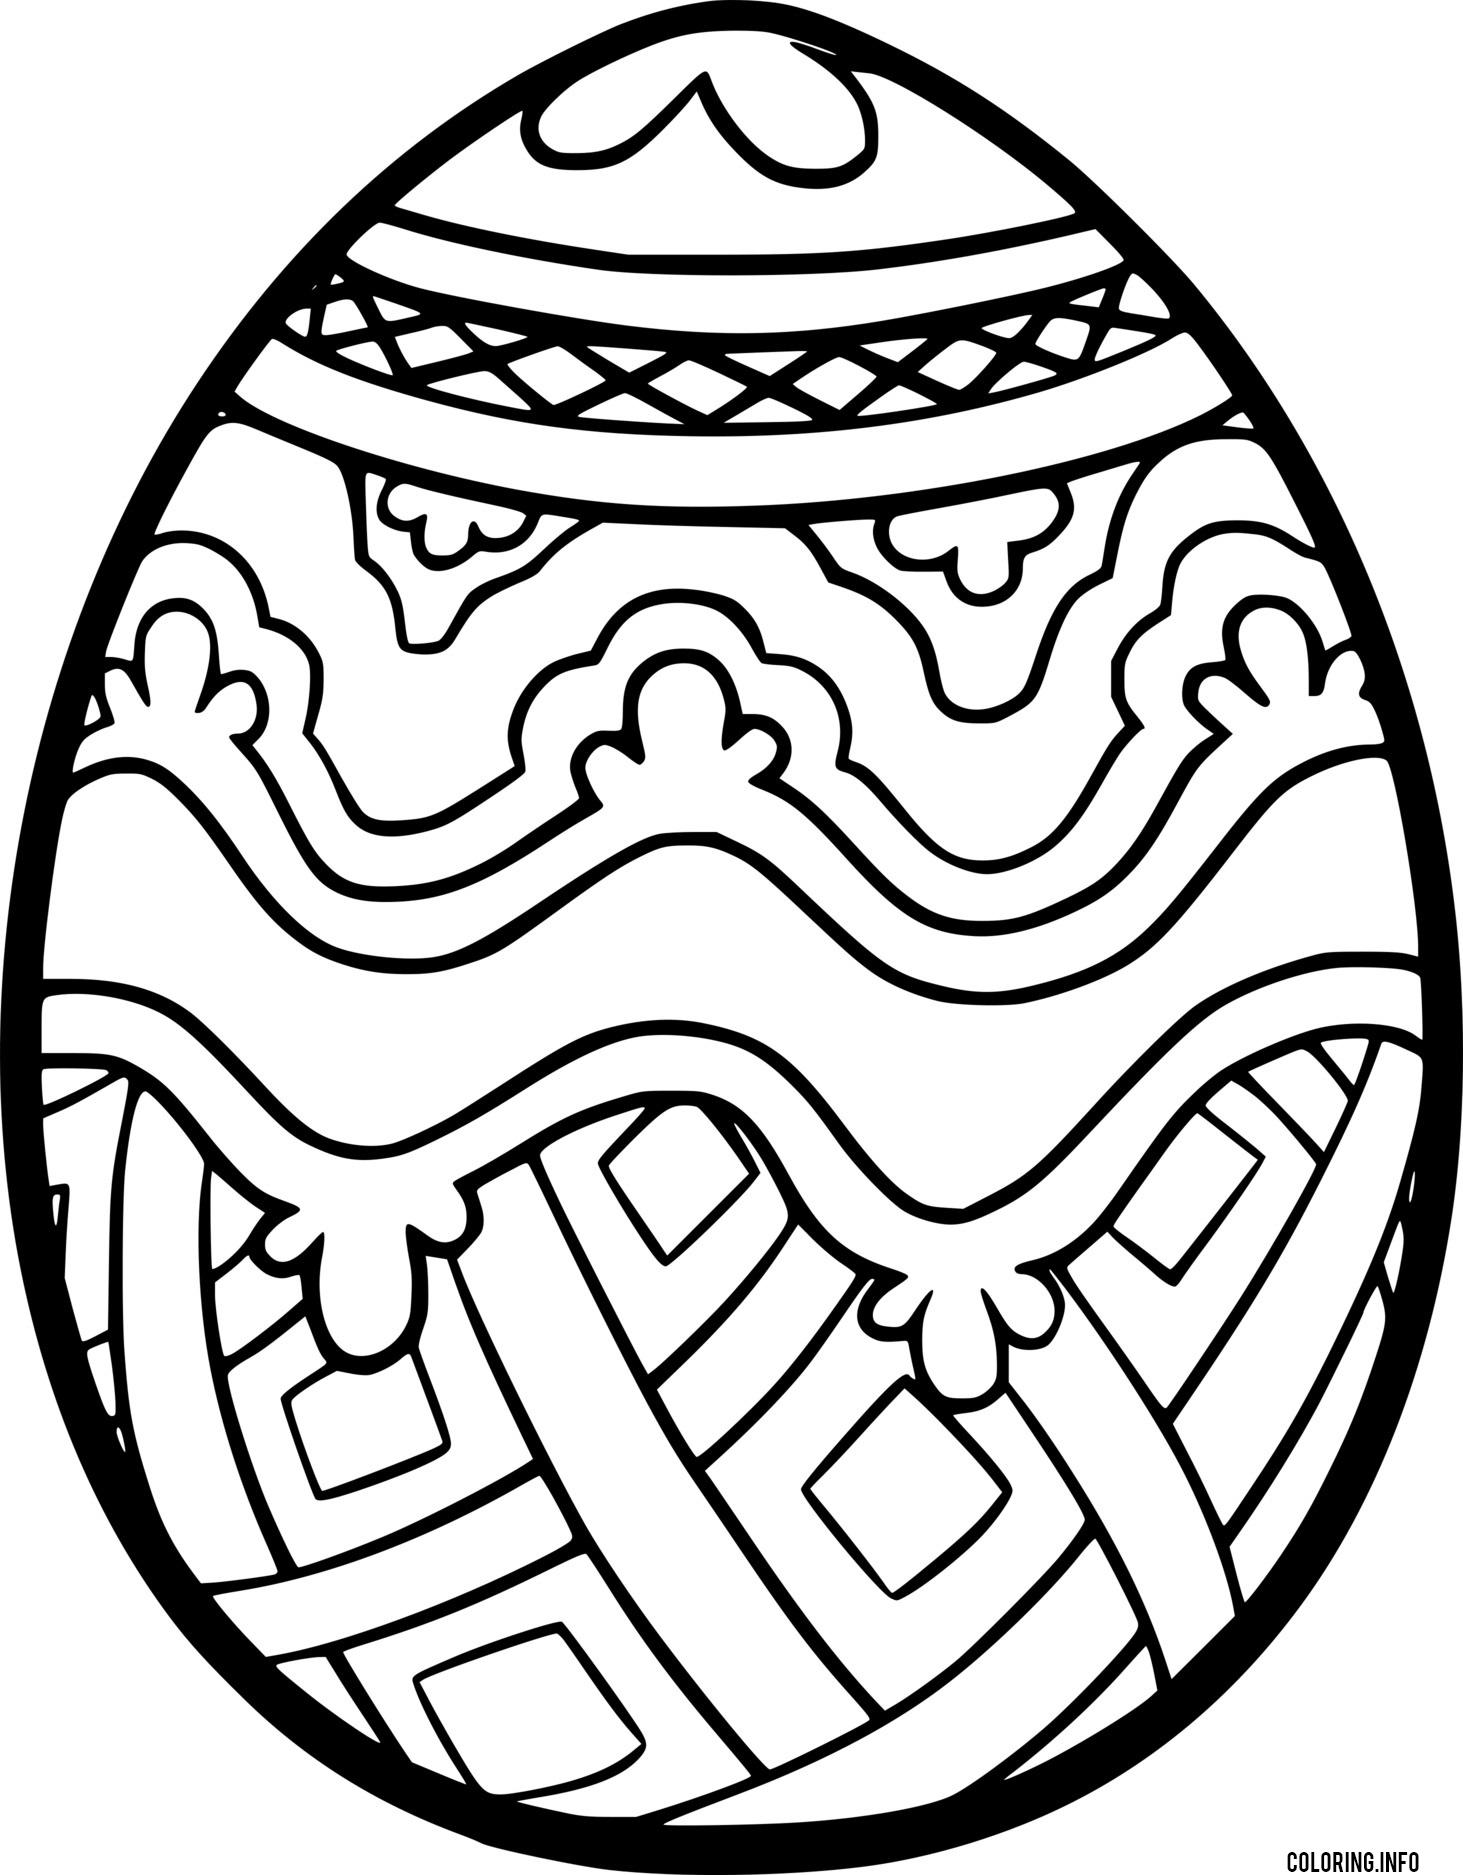 Easter Egg With Odd Patterns coloring